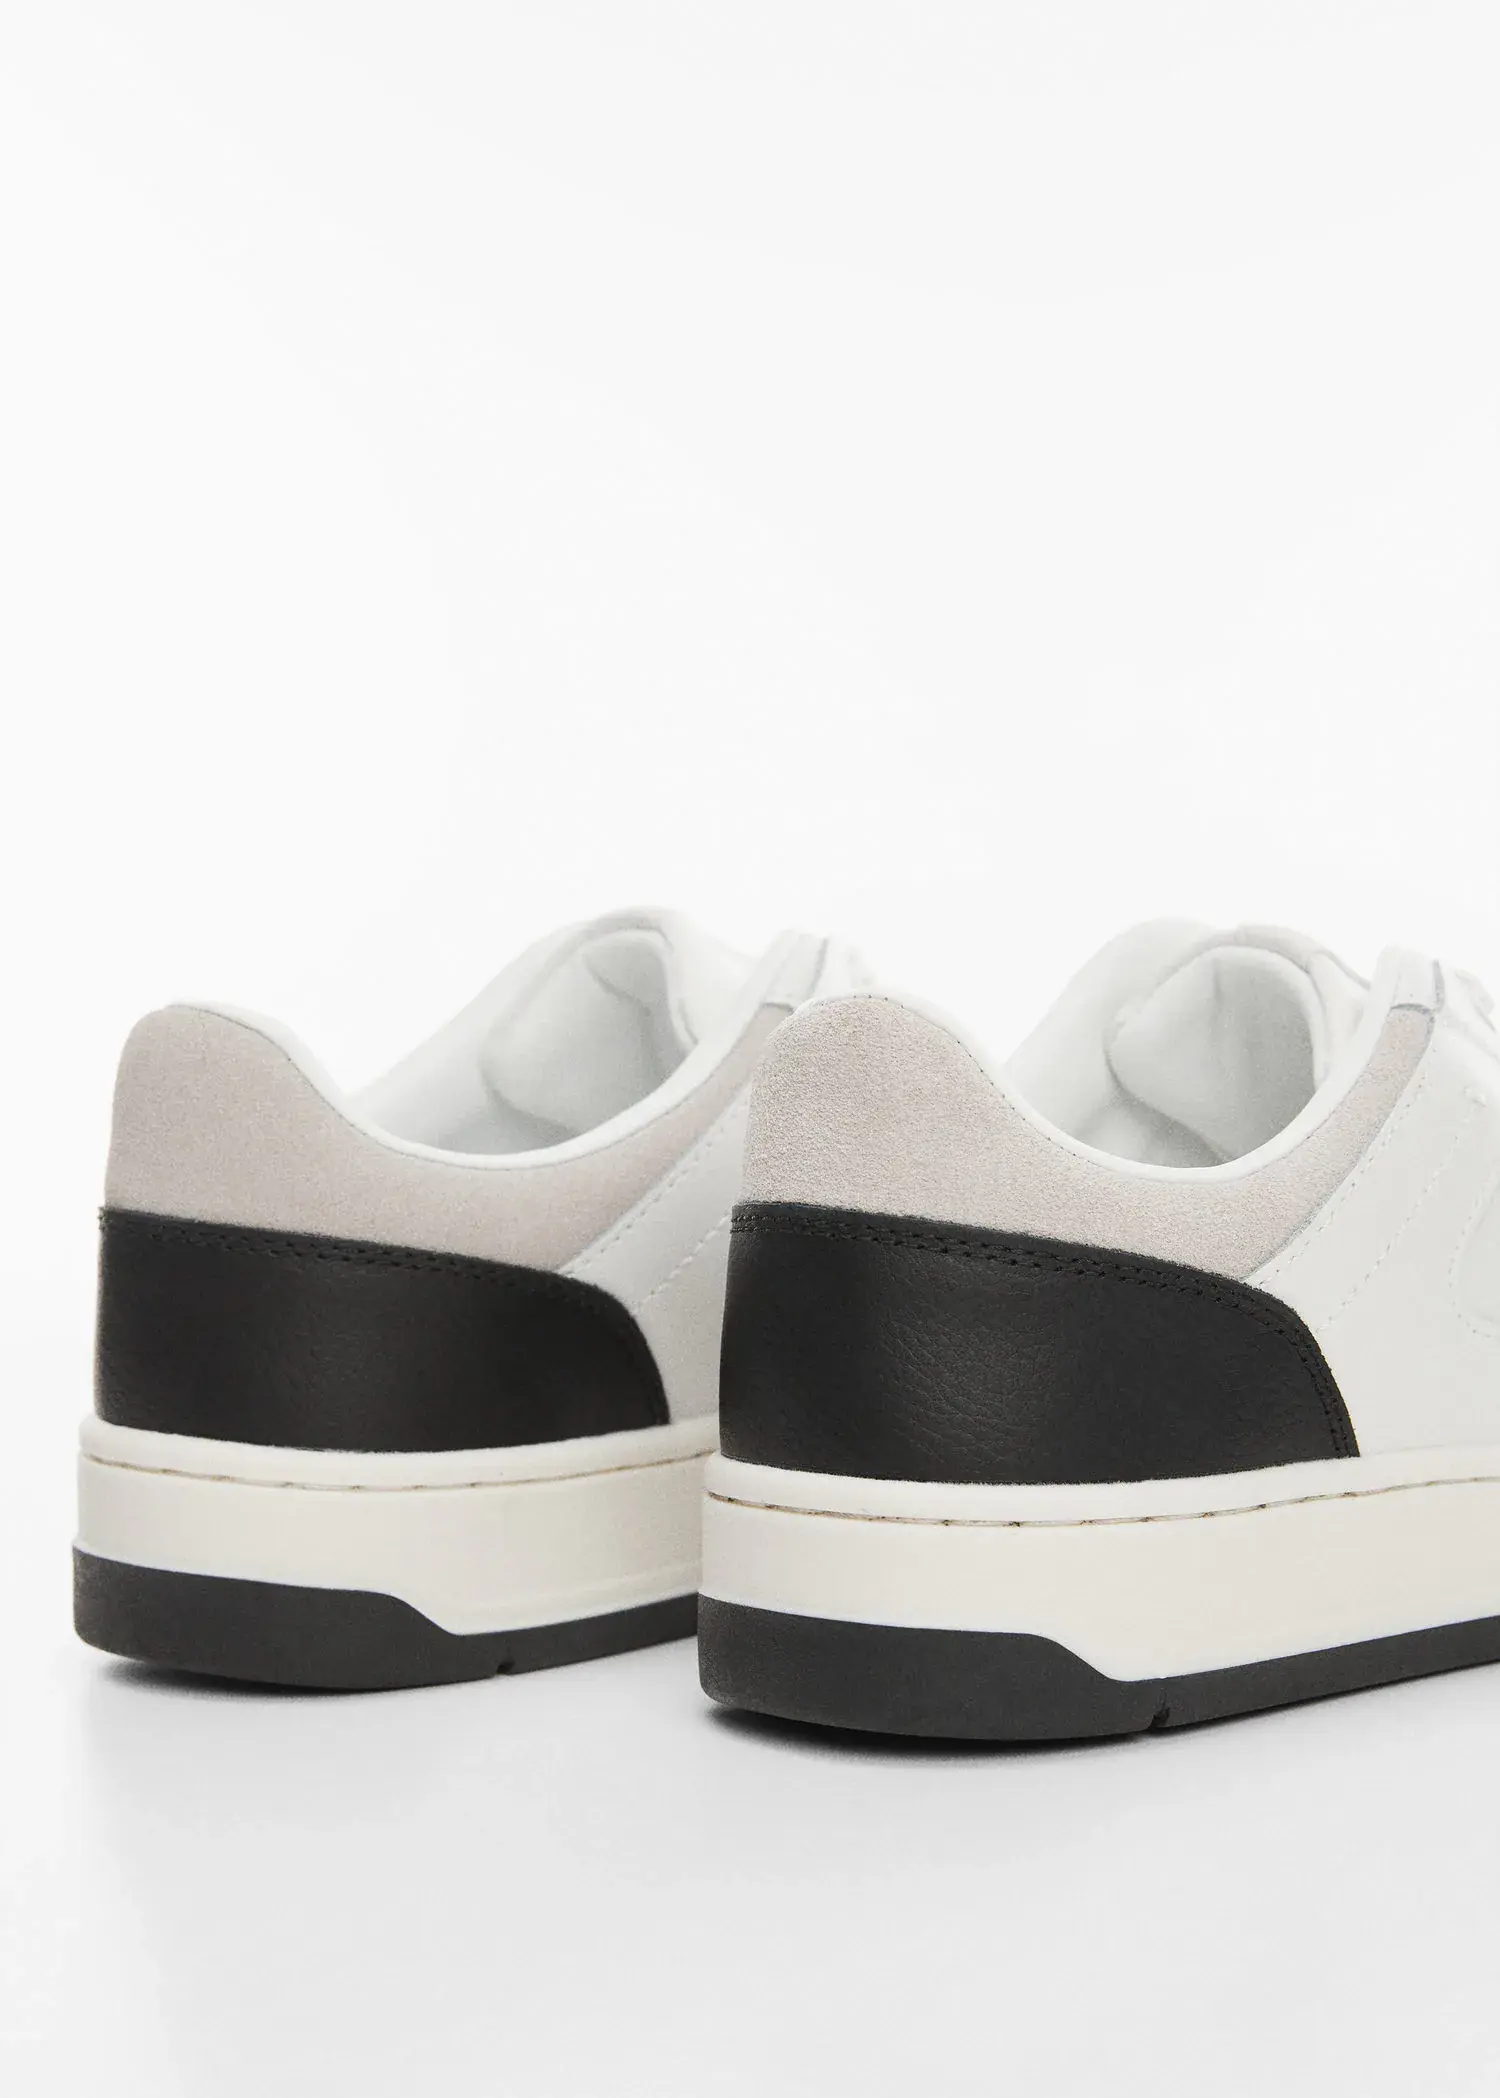 Mango Combined leather trainers. 2